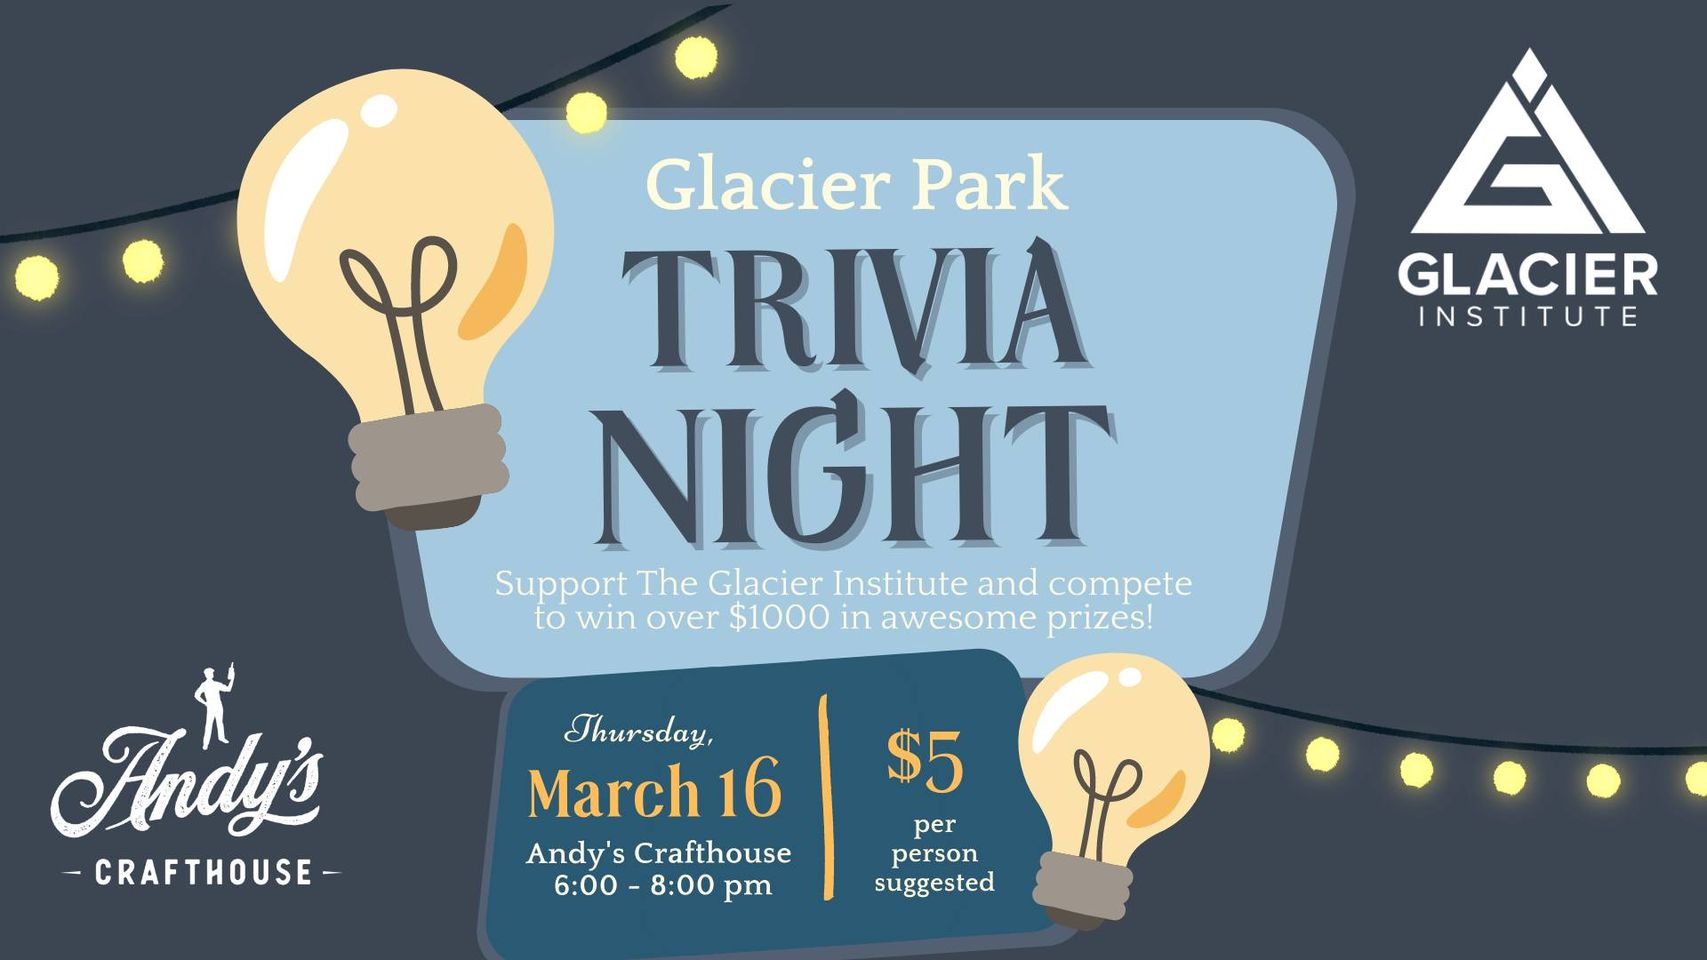 Glacier Park Trivia Night at Andy's Crafthouse